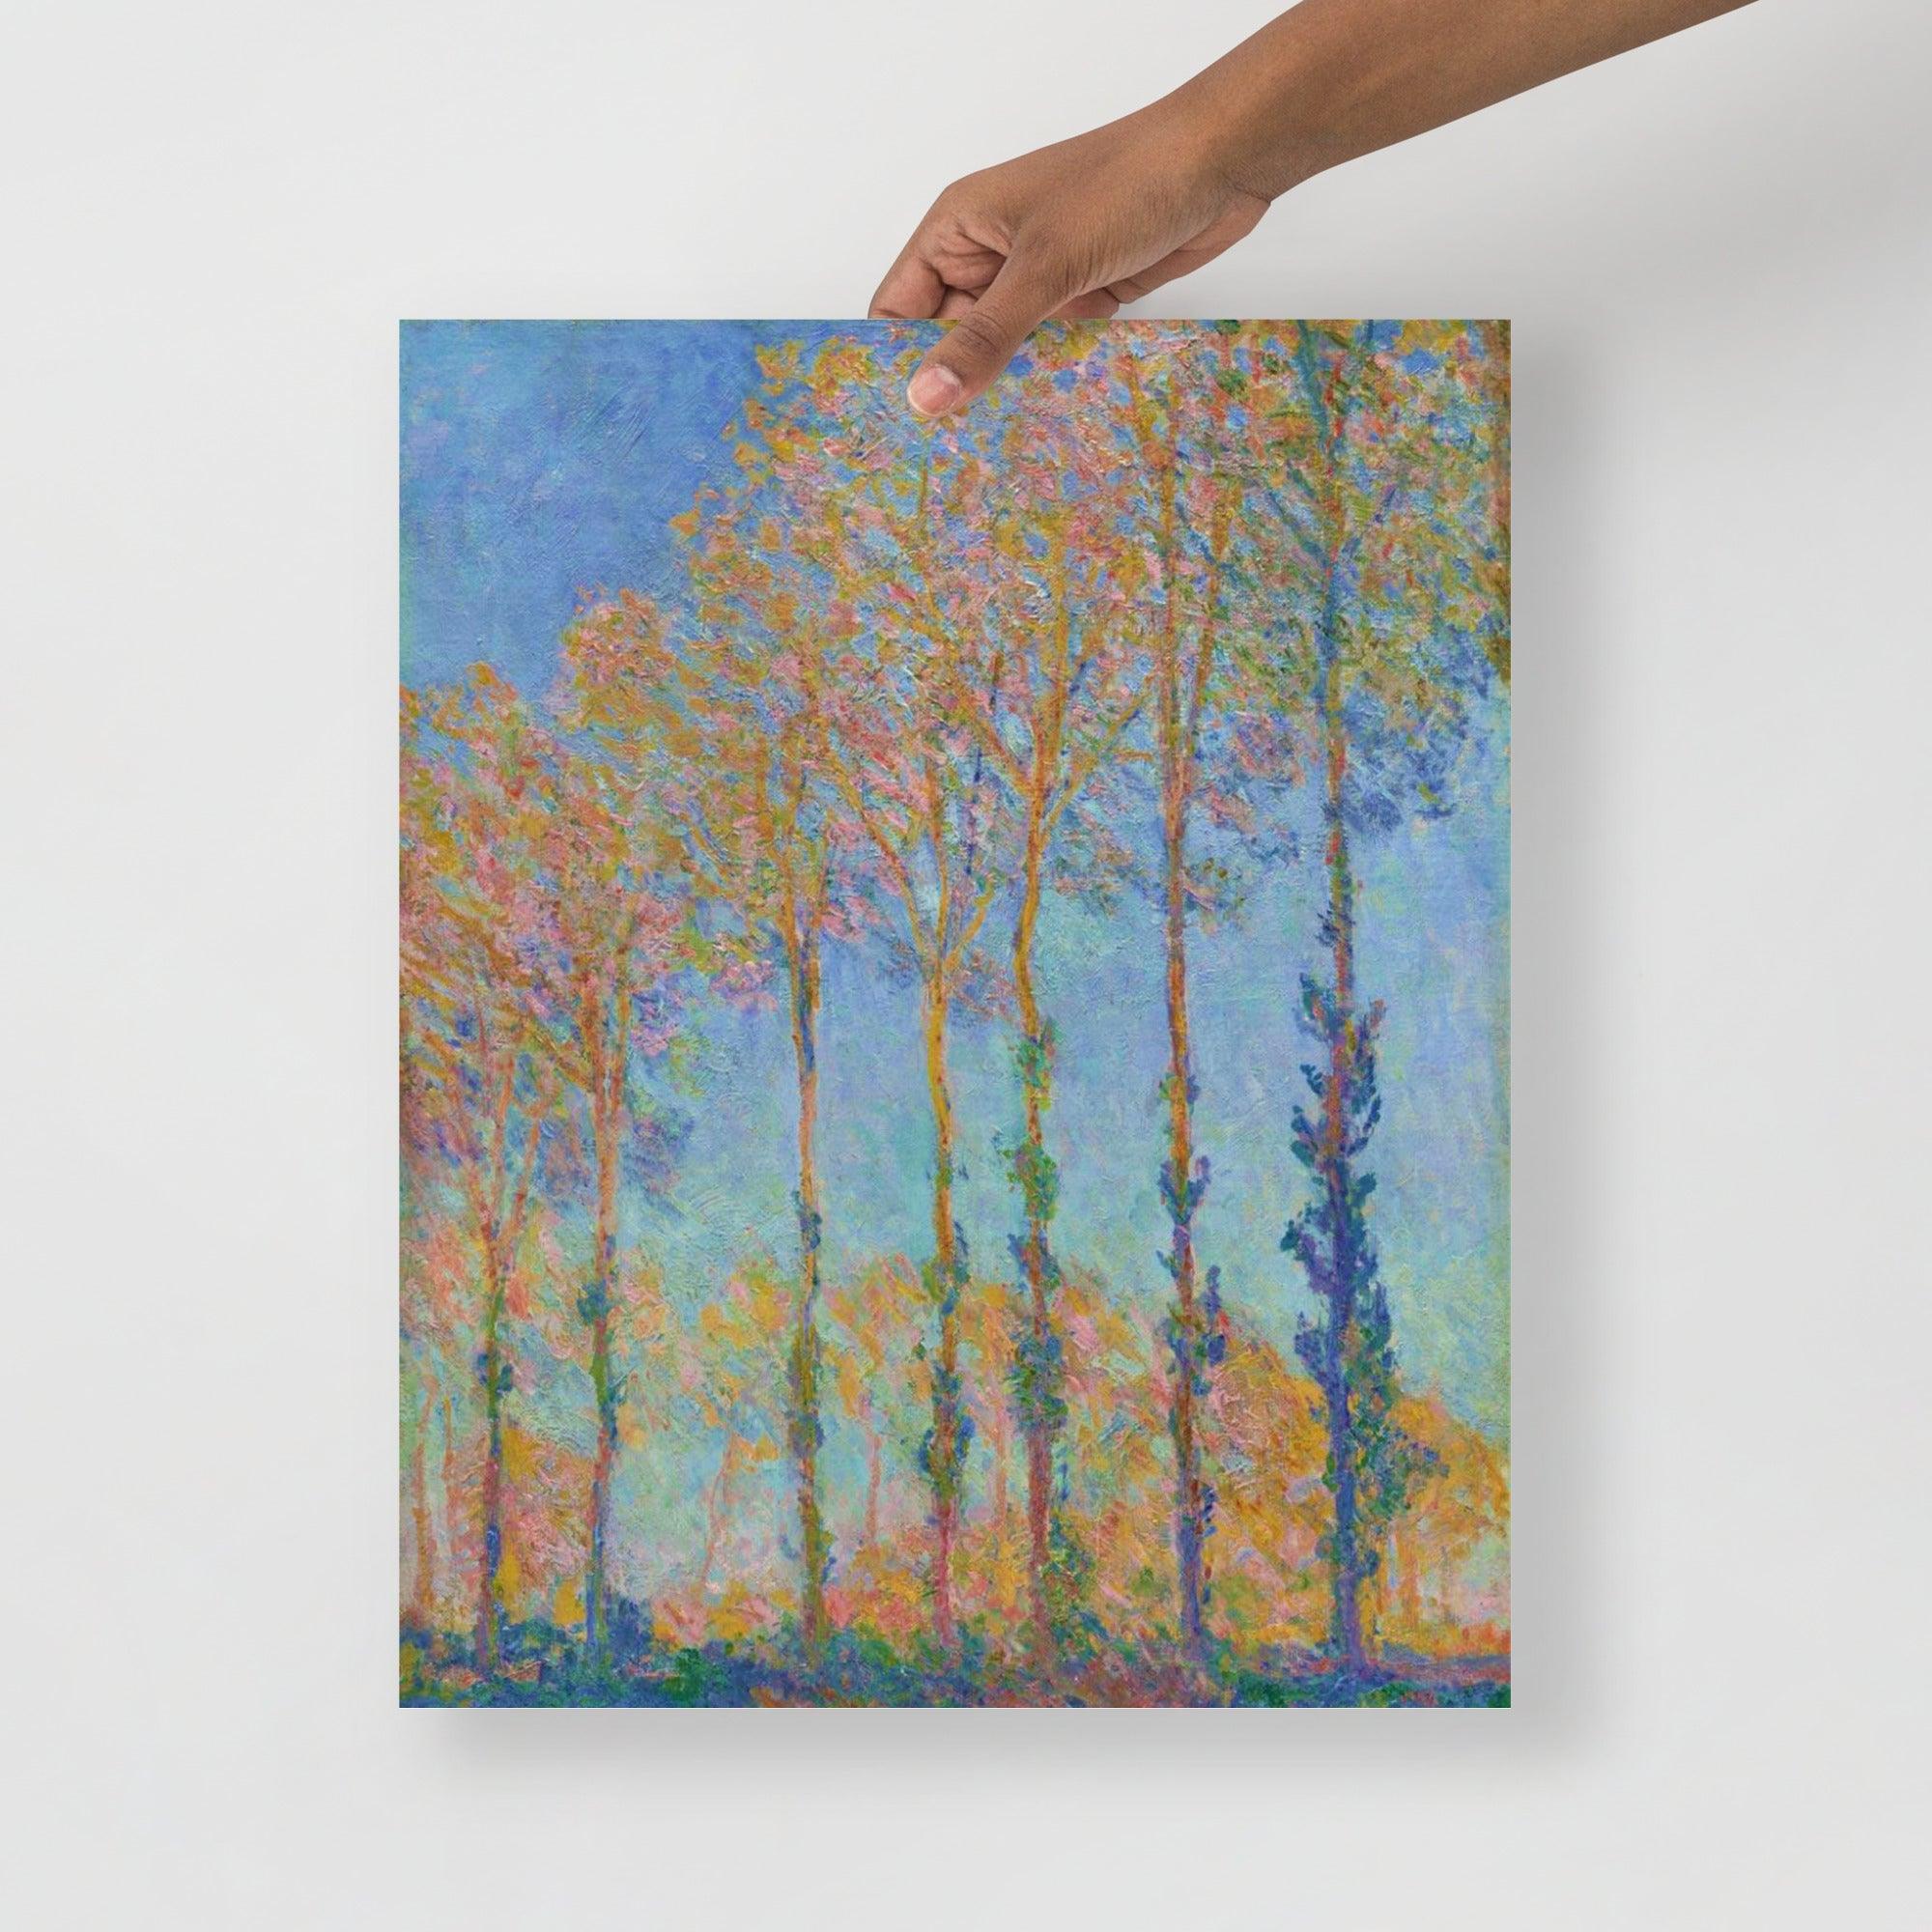 A Poplars on the Bank of the Epte River by Claude Monet poster on a plain backdrop in size 16x20”.